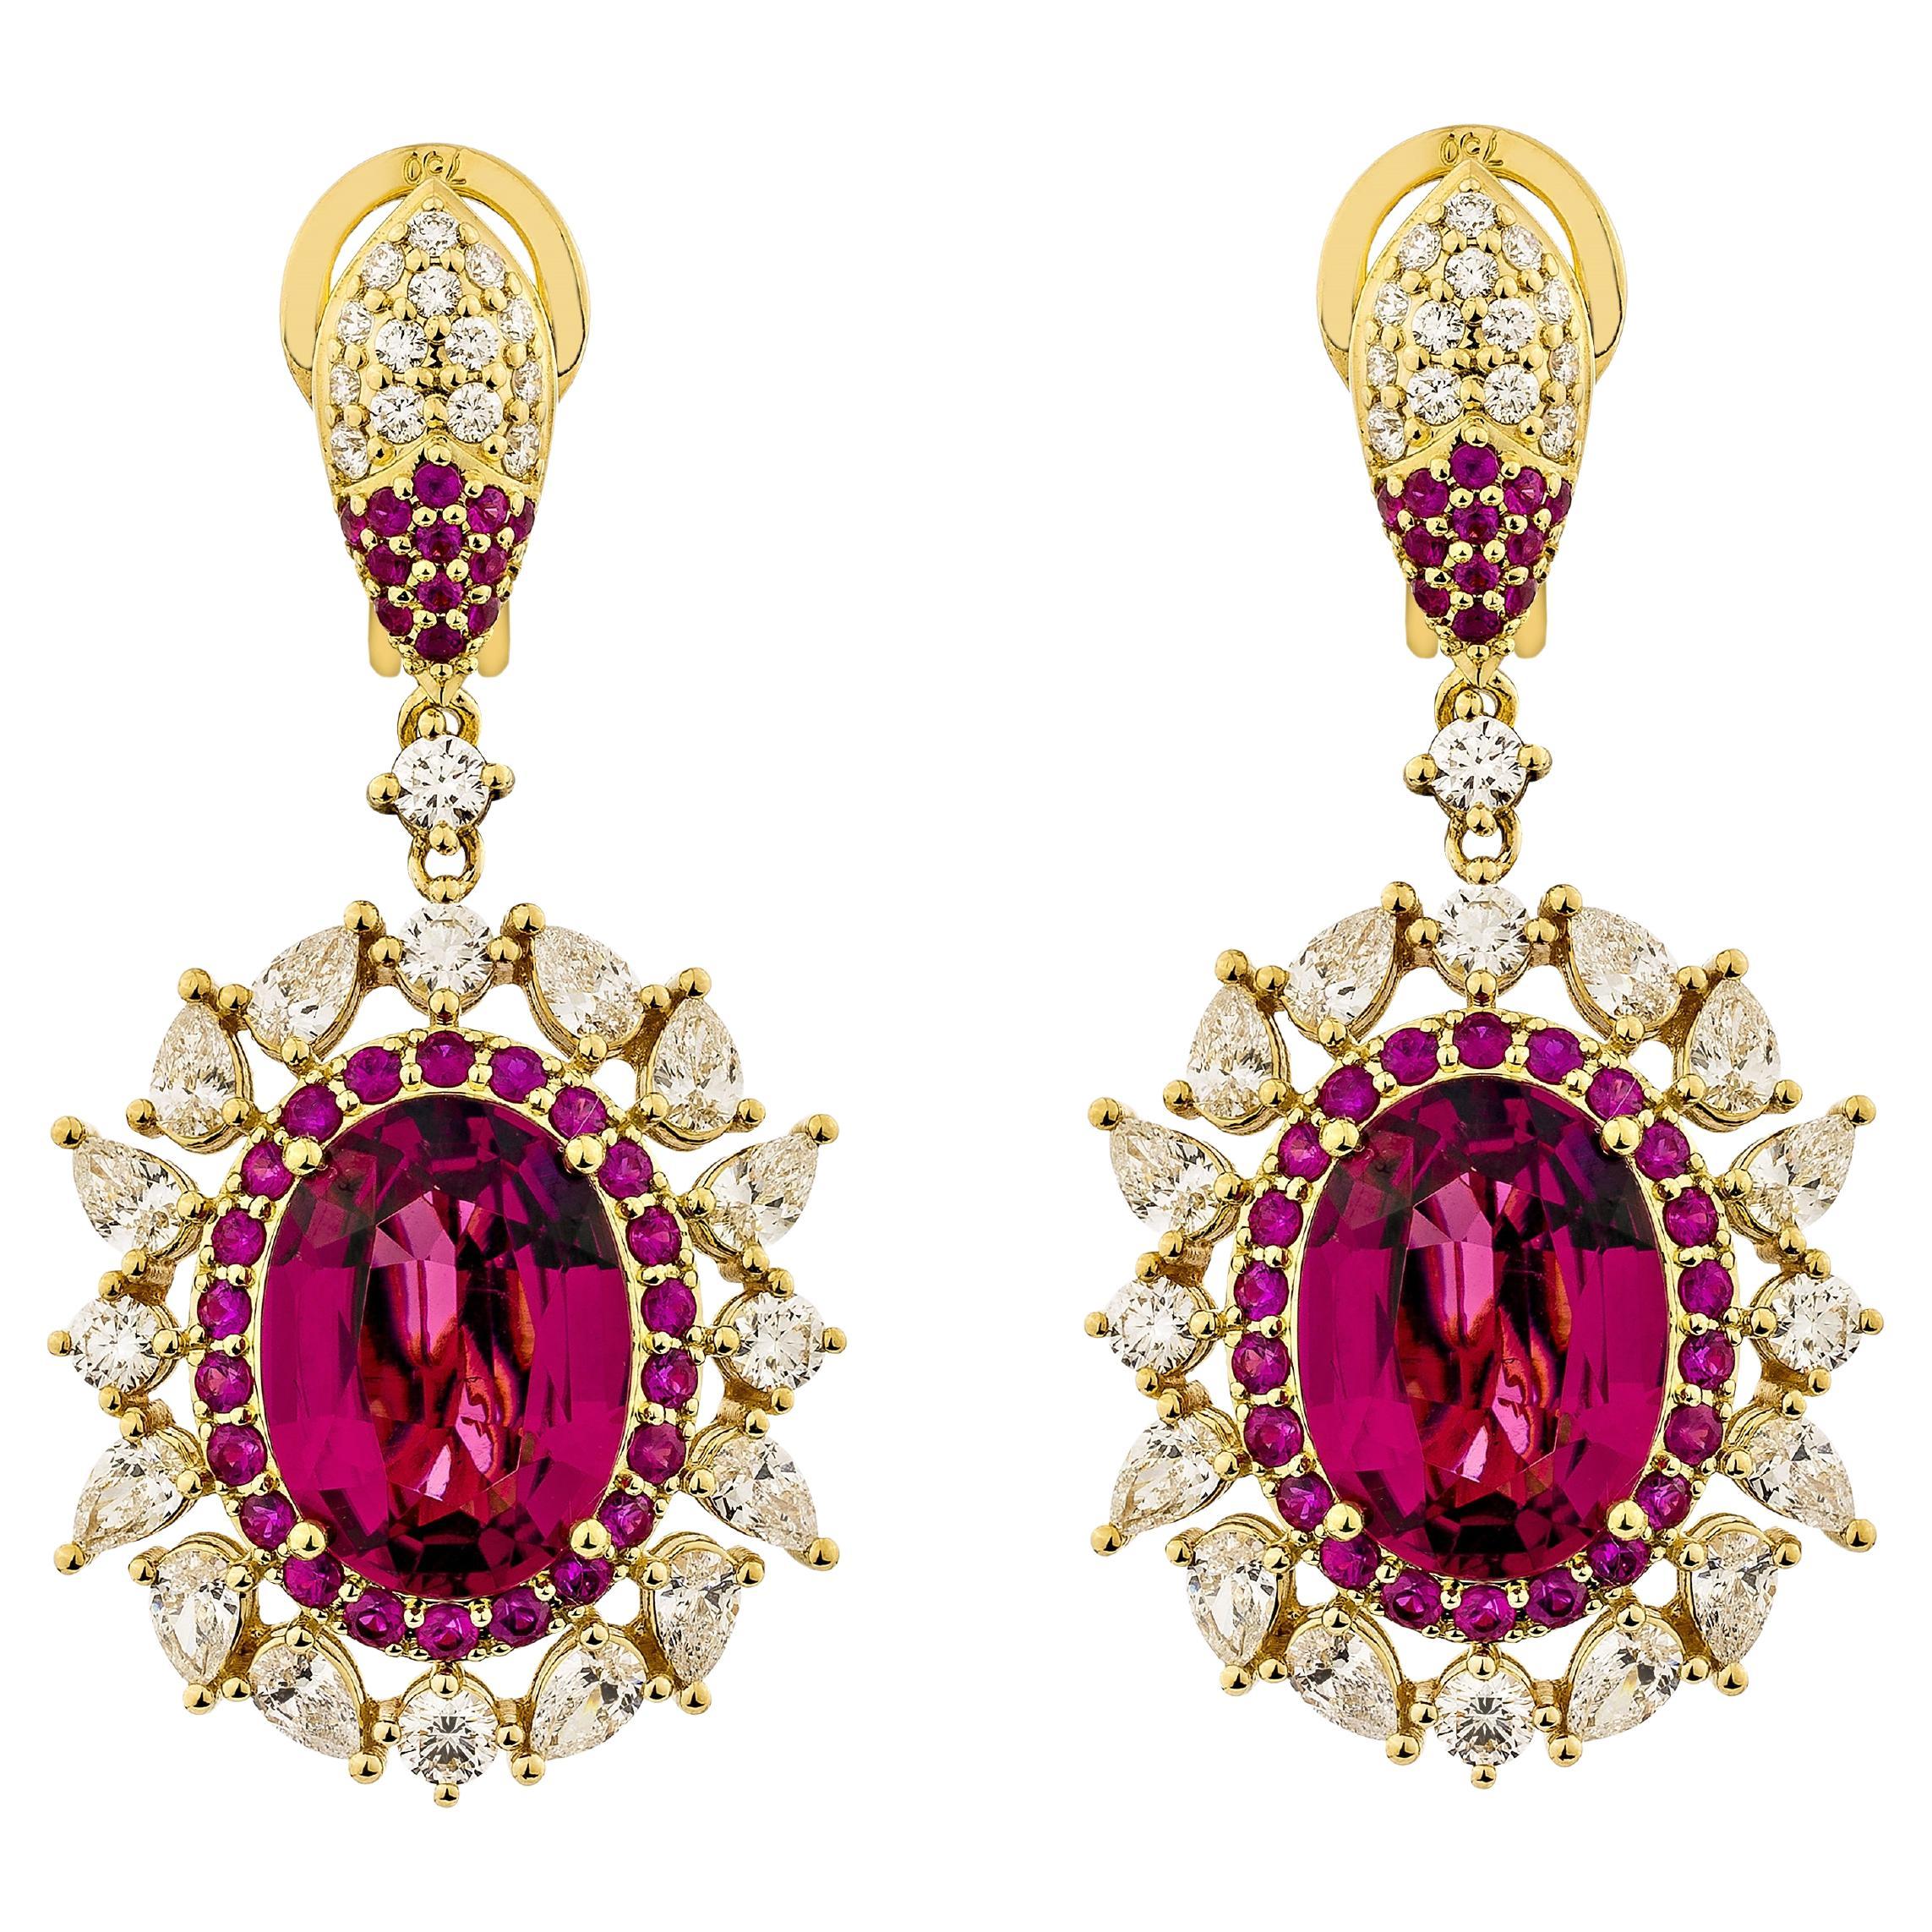 10.962 Carat Rubellite Drop Earrings in 18KYG with Ruby and White Diamond.